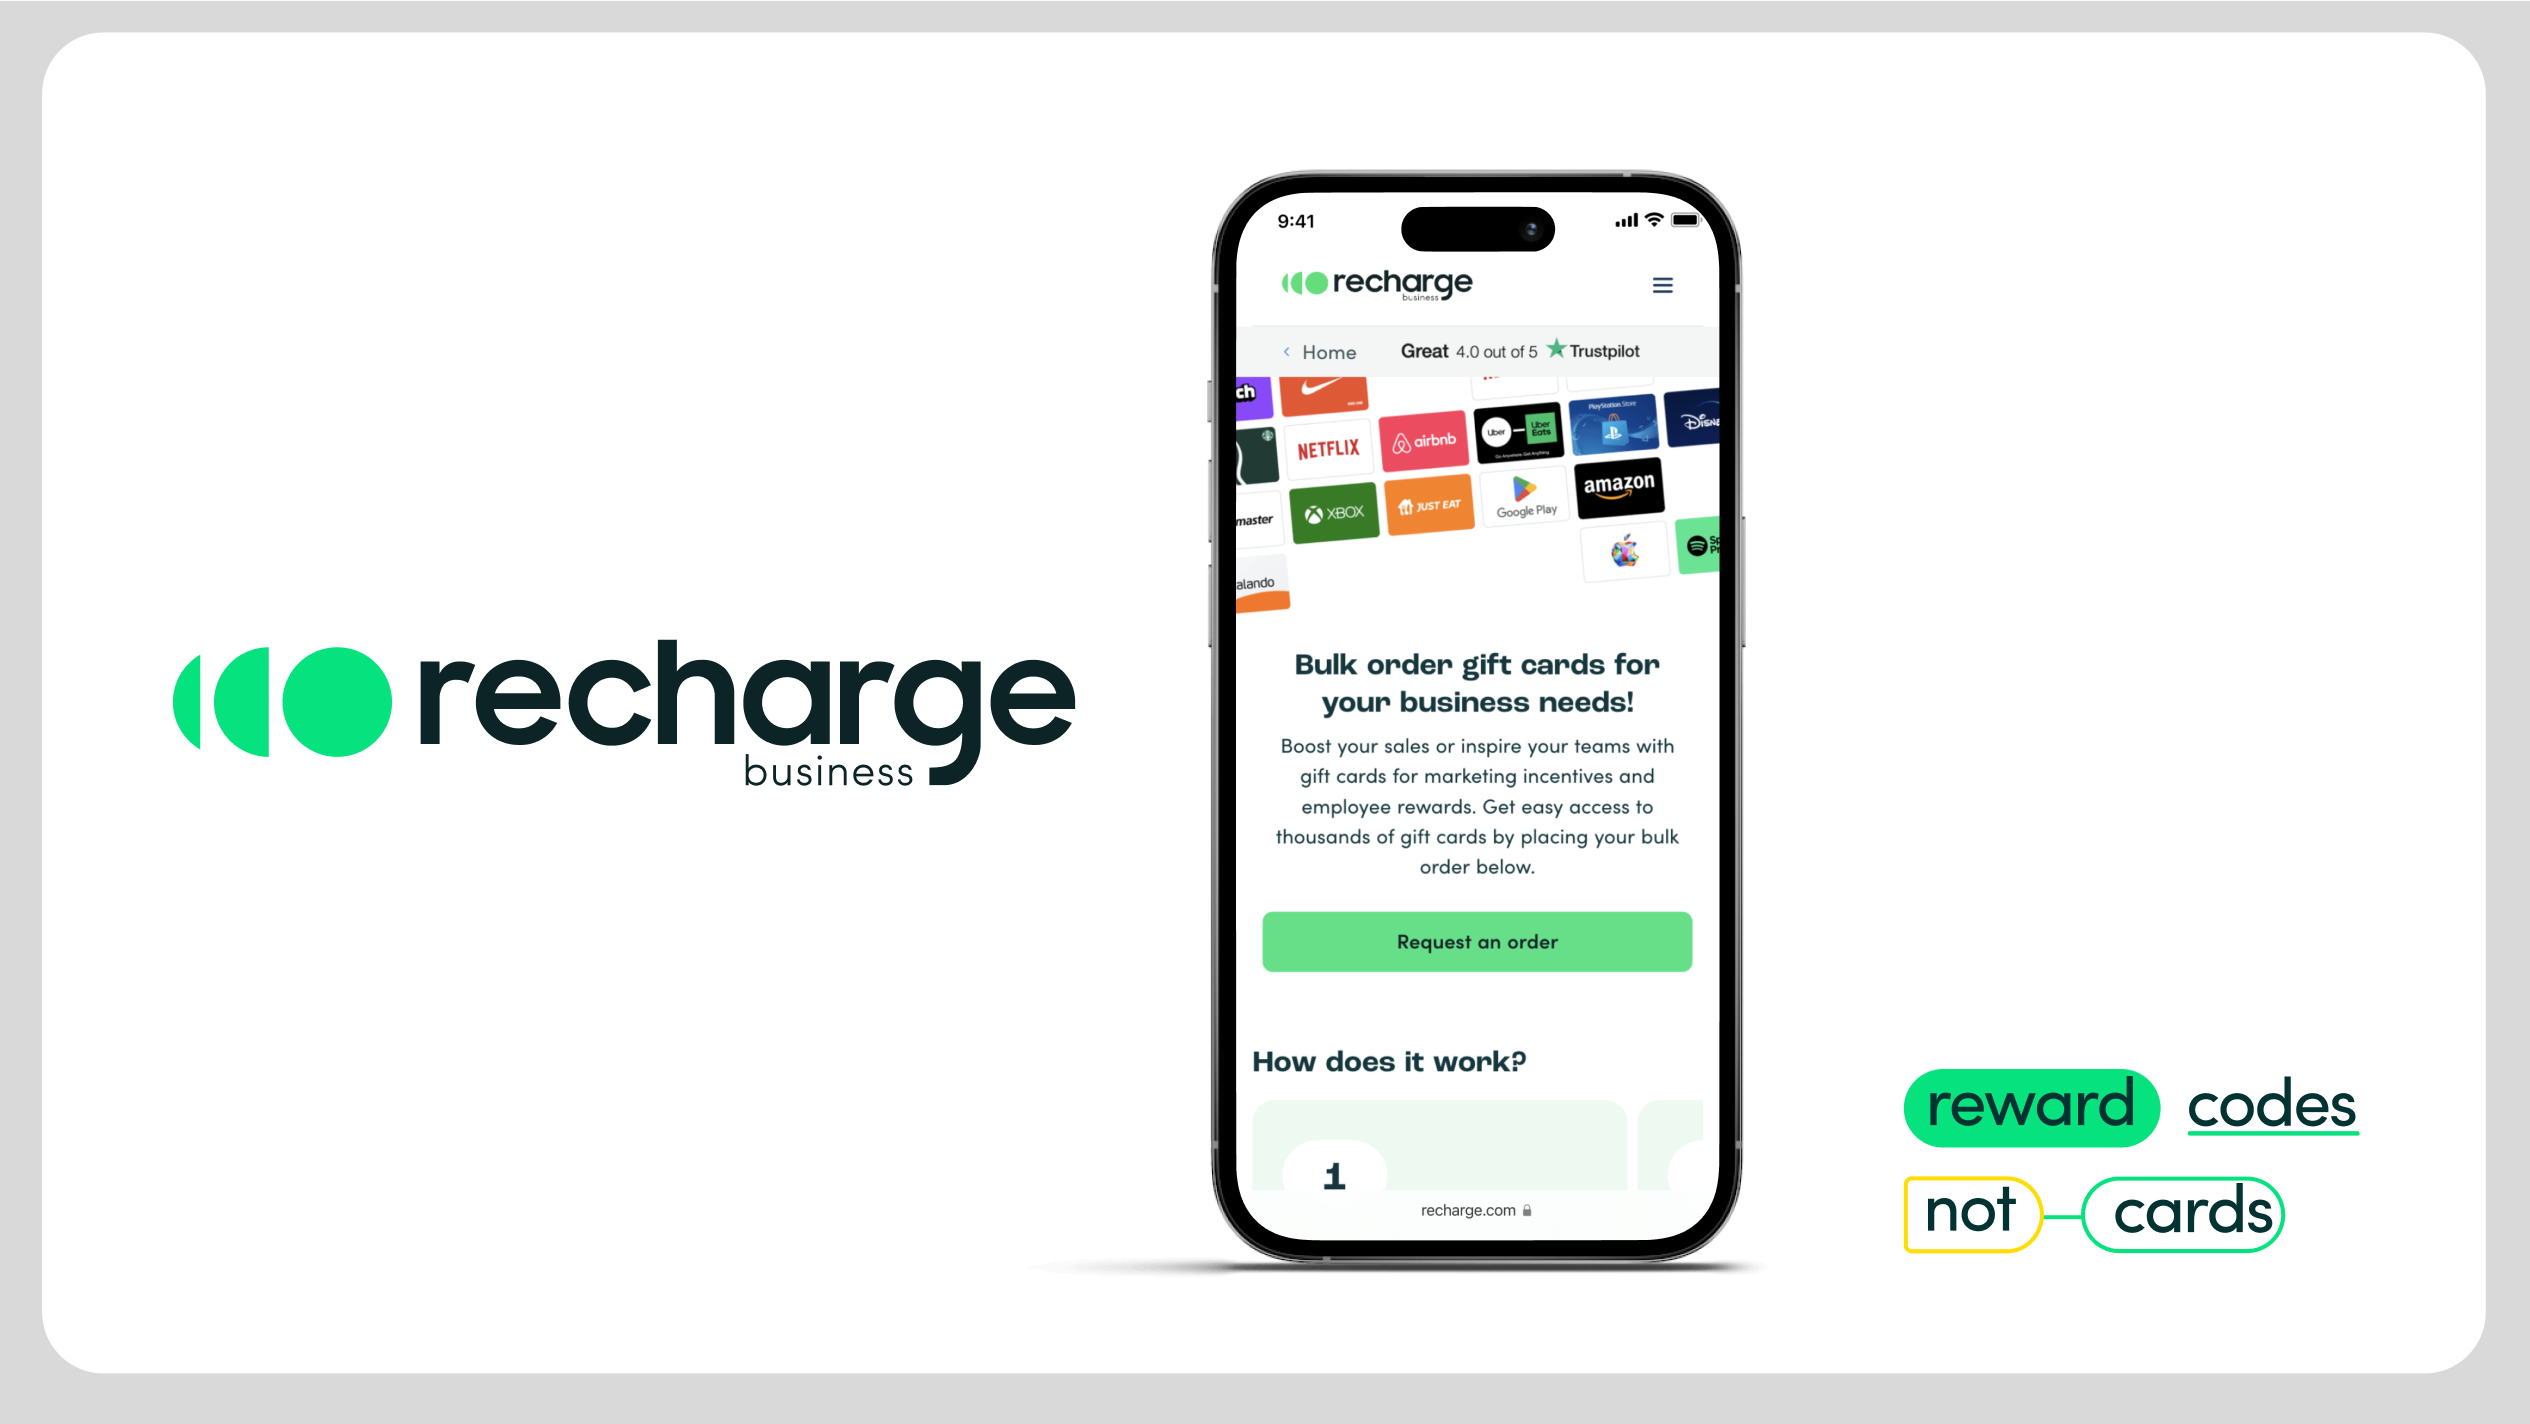 Recharge Pilots New B2B Service, Enabling Corporate Gifting of